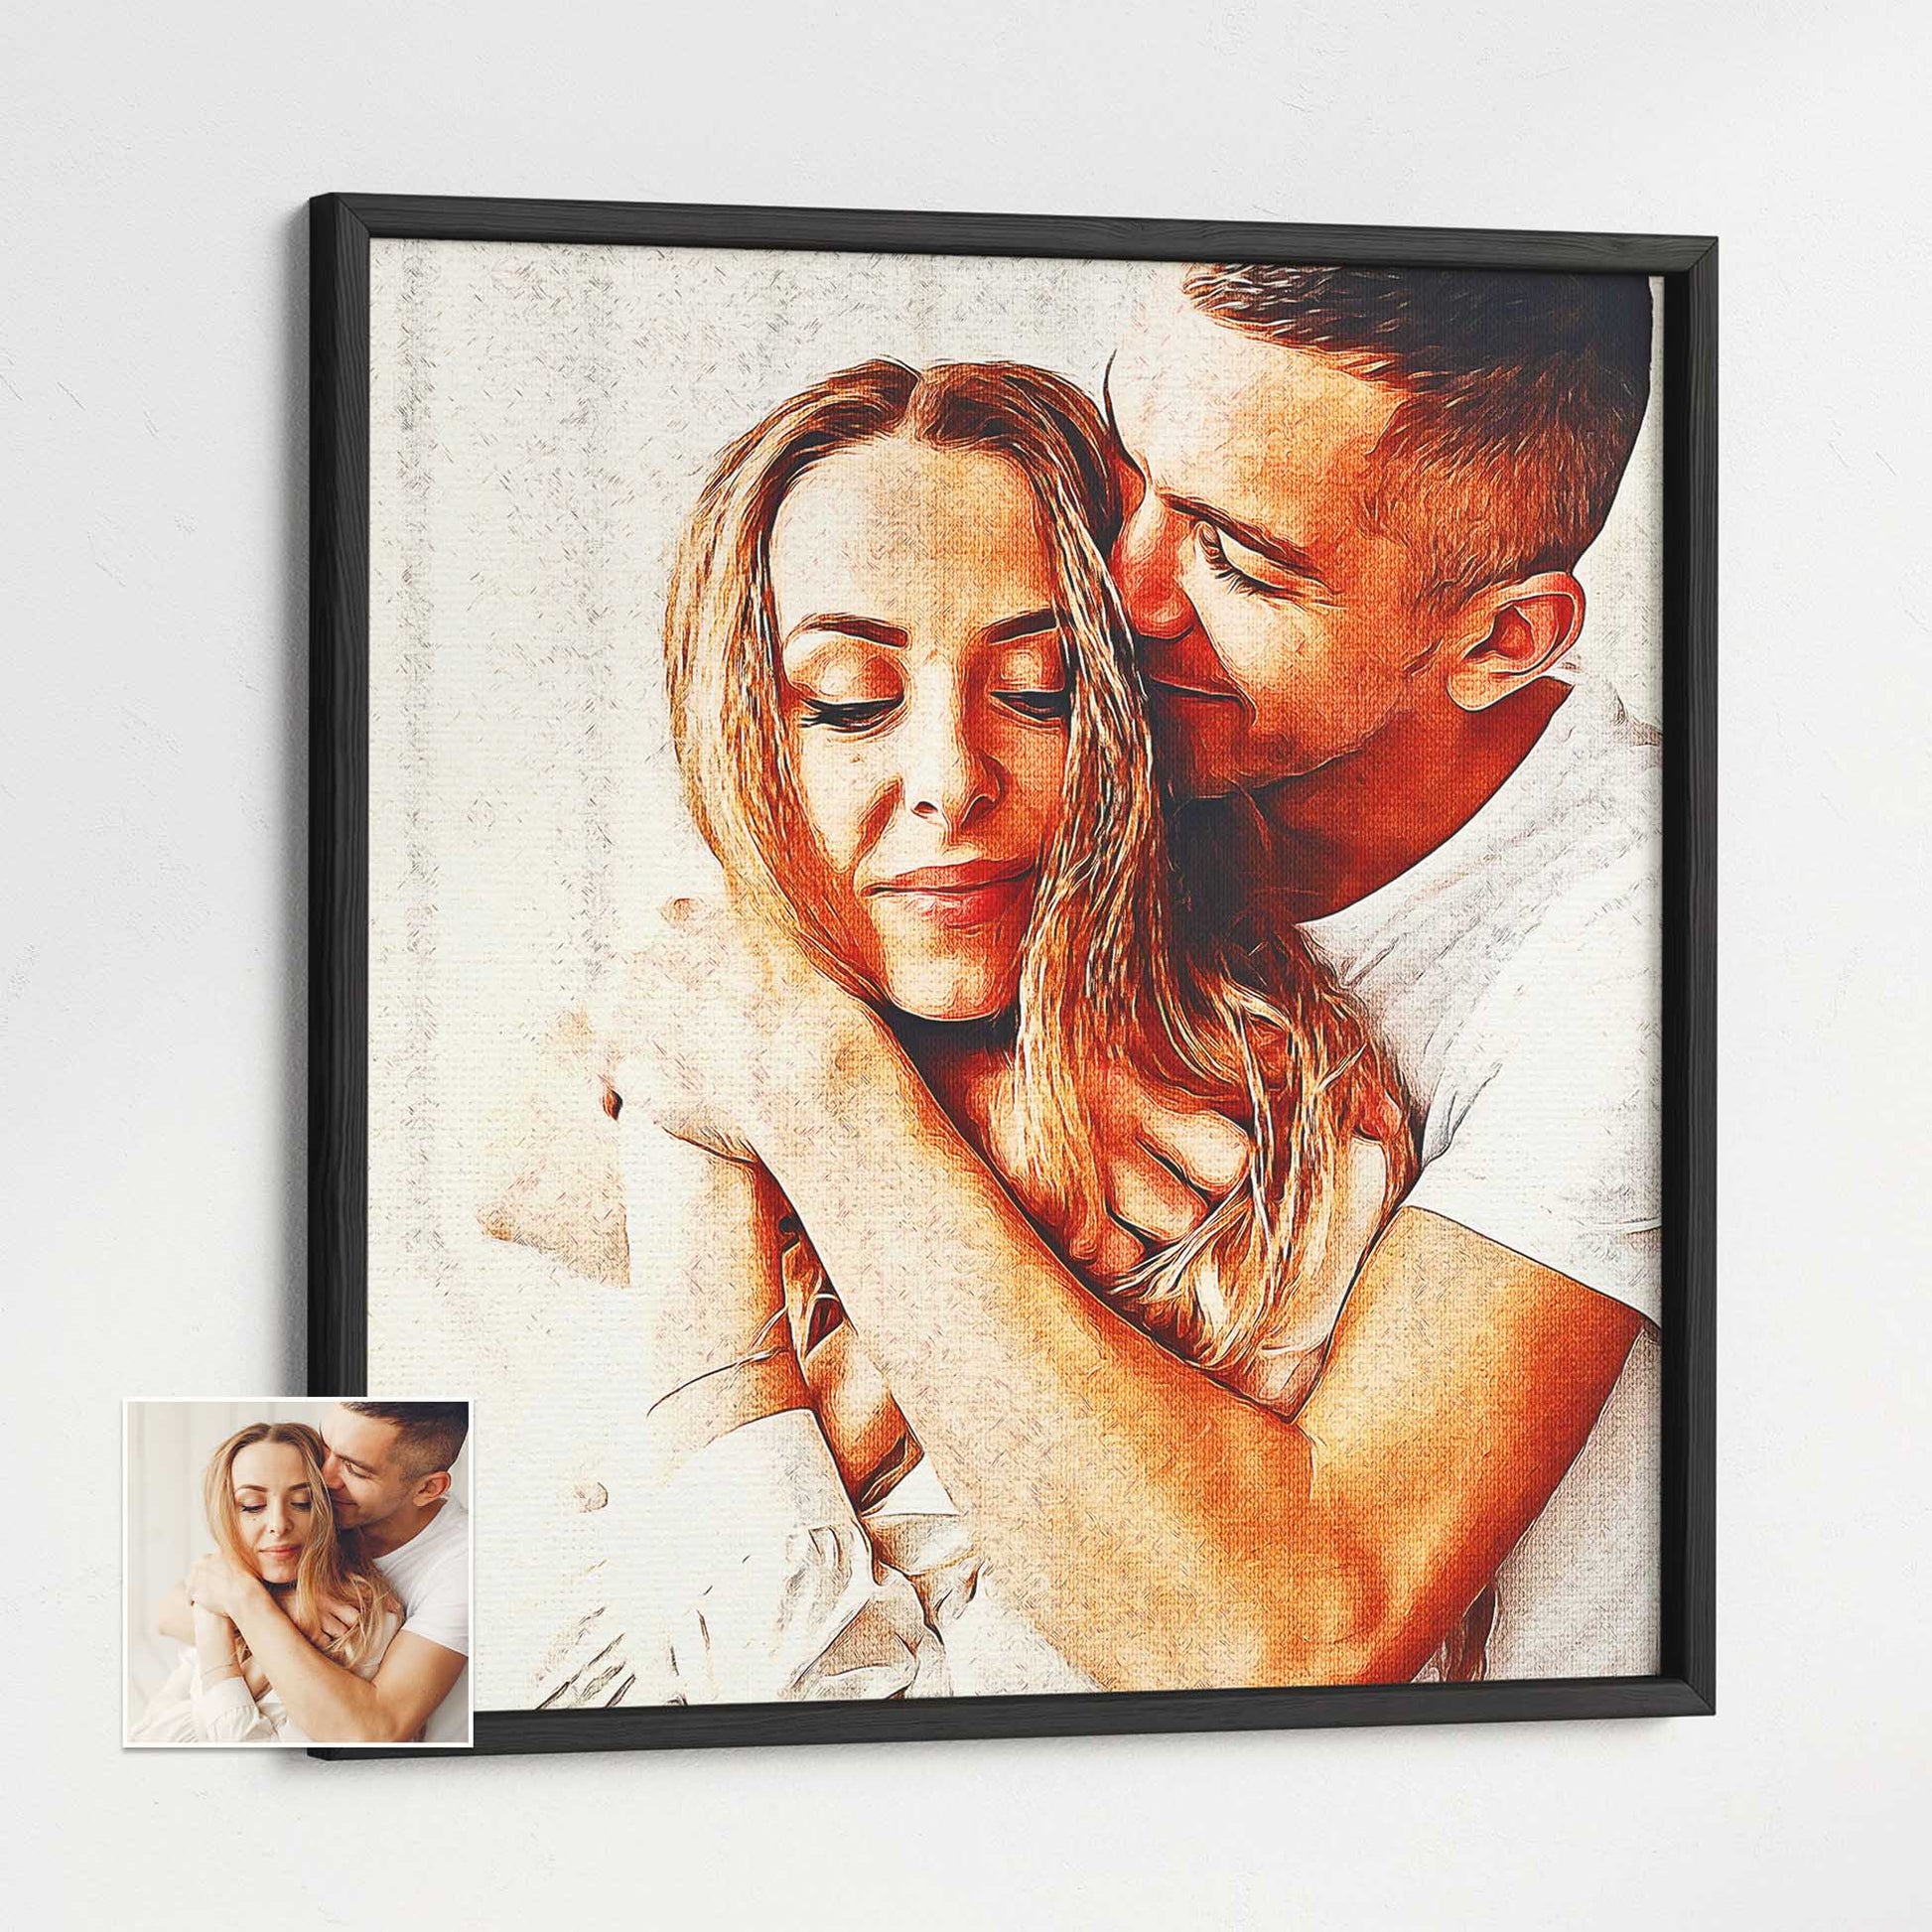 Transform your living environment into a gallery-like space with our Personalised Artistic Oil Painting Framed Print. The exquisite craftsmanship, combined with the rich and vibrant colors, infuses life and energy into your walls